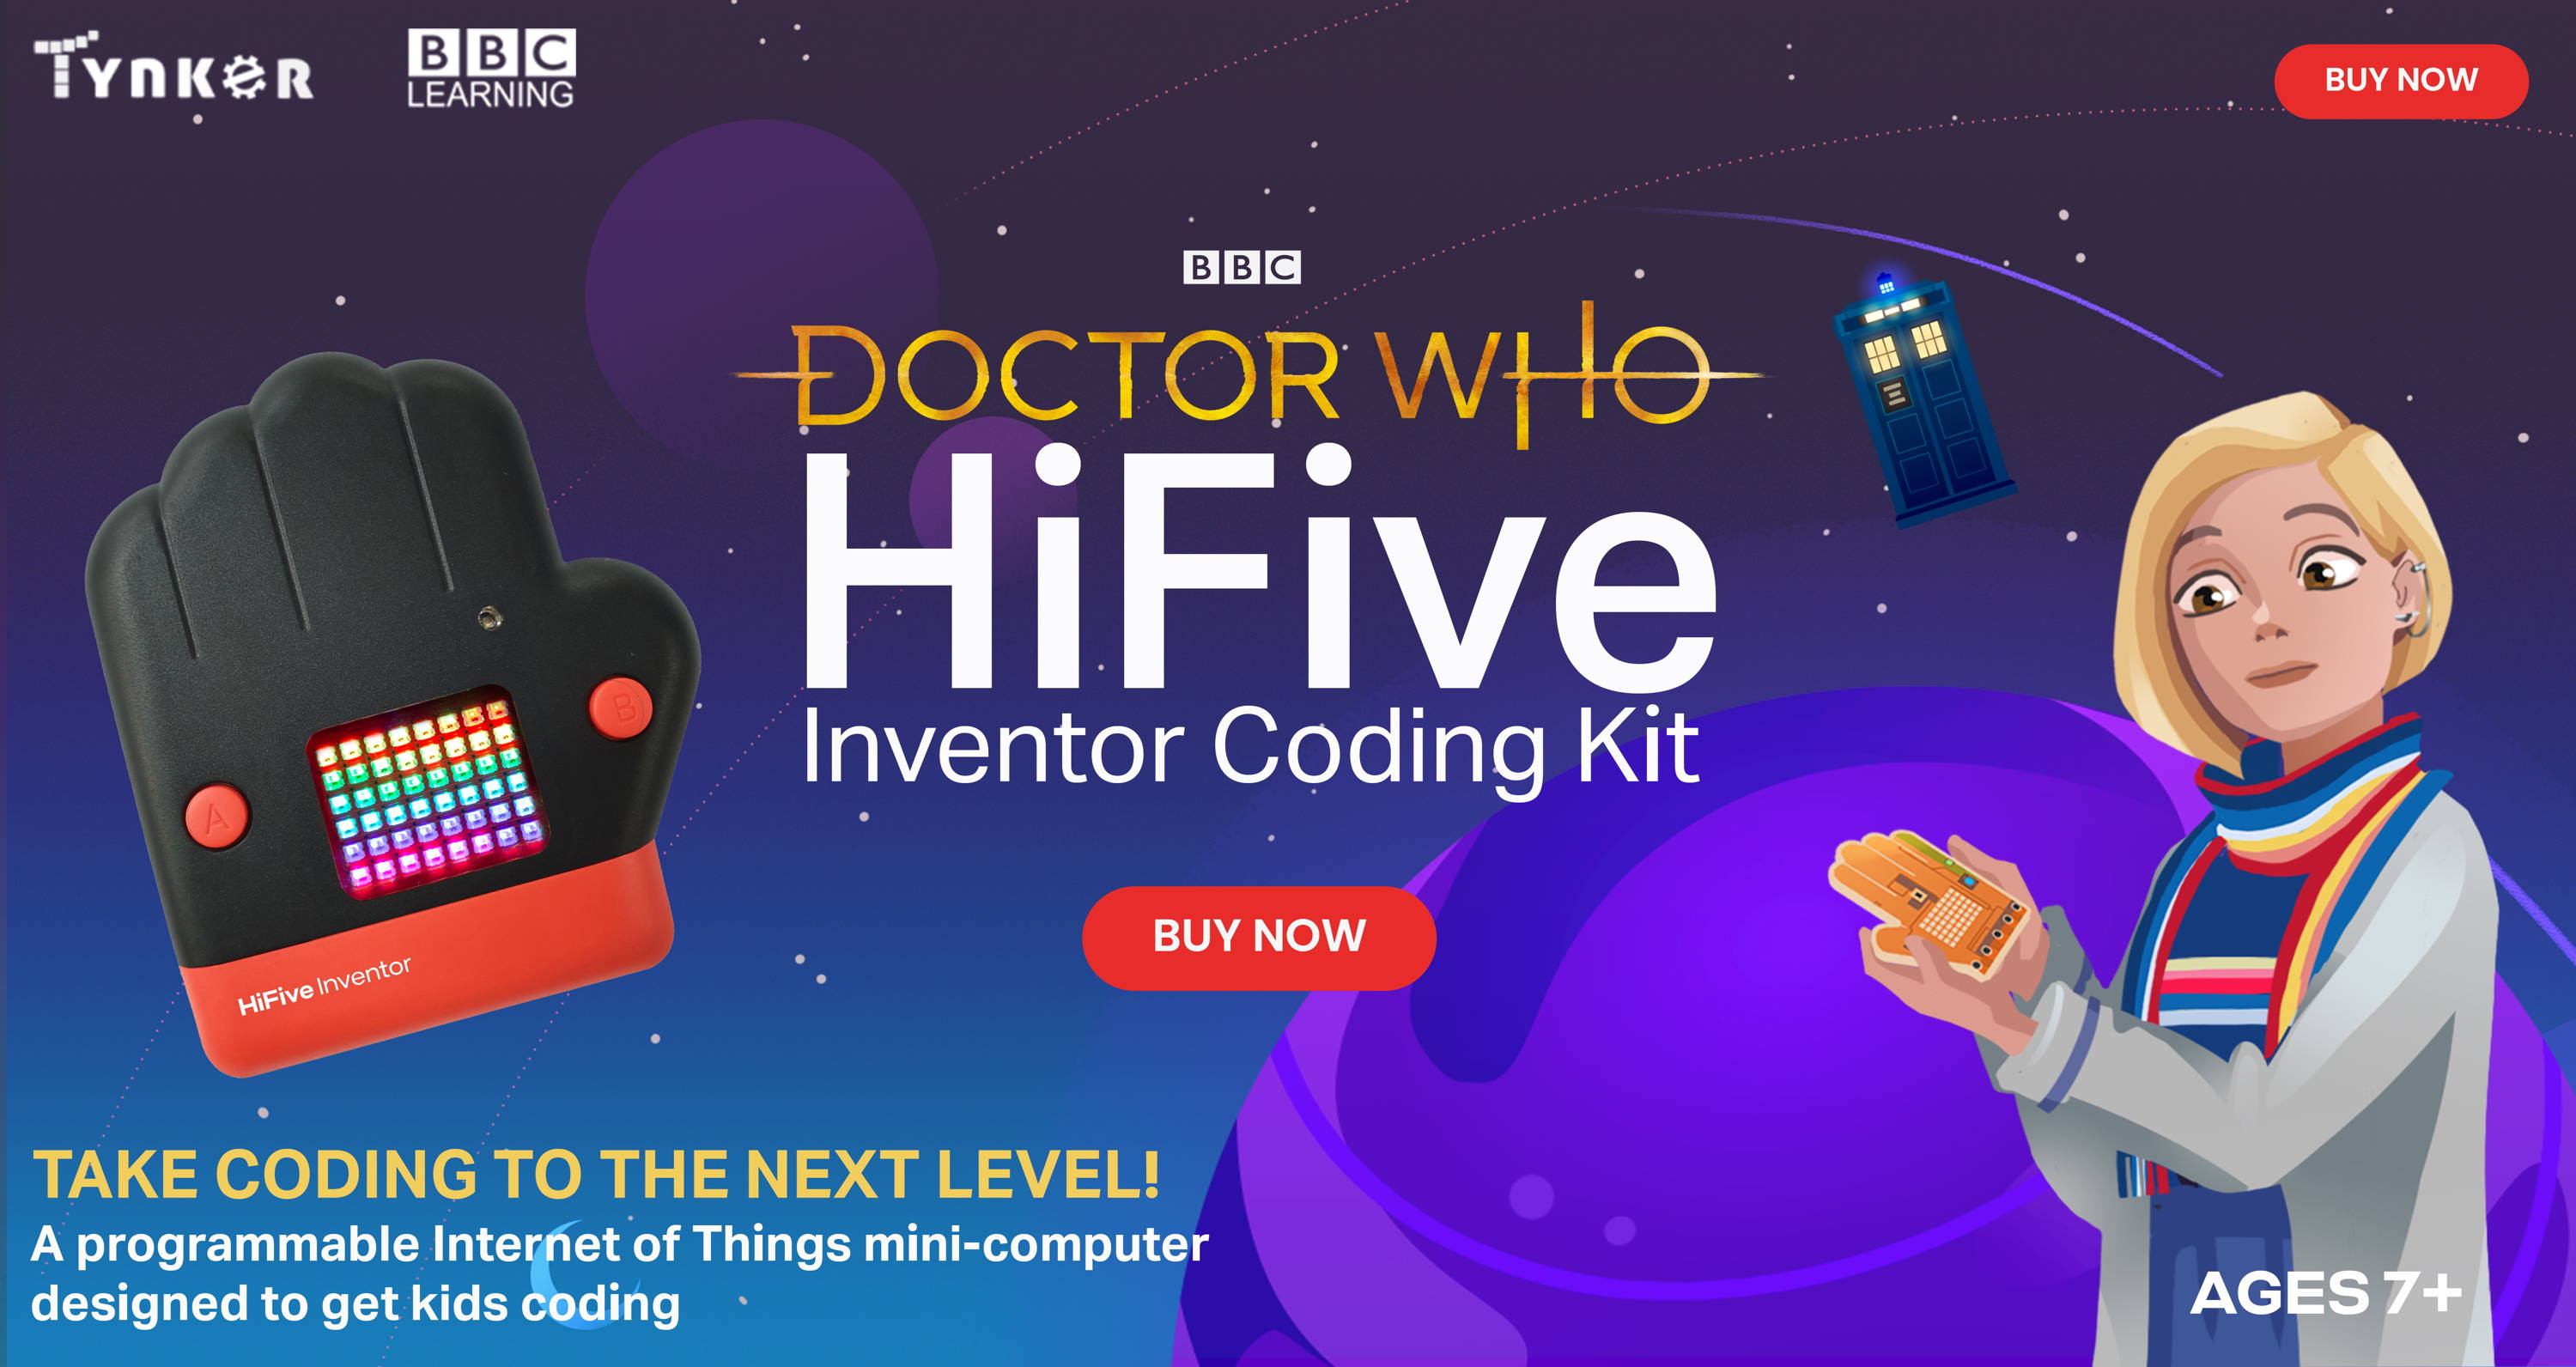 Doctor Who: HiFive Inventor Coding Kit